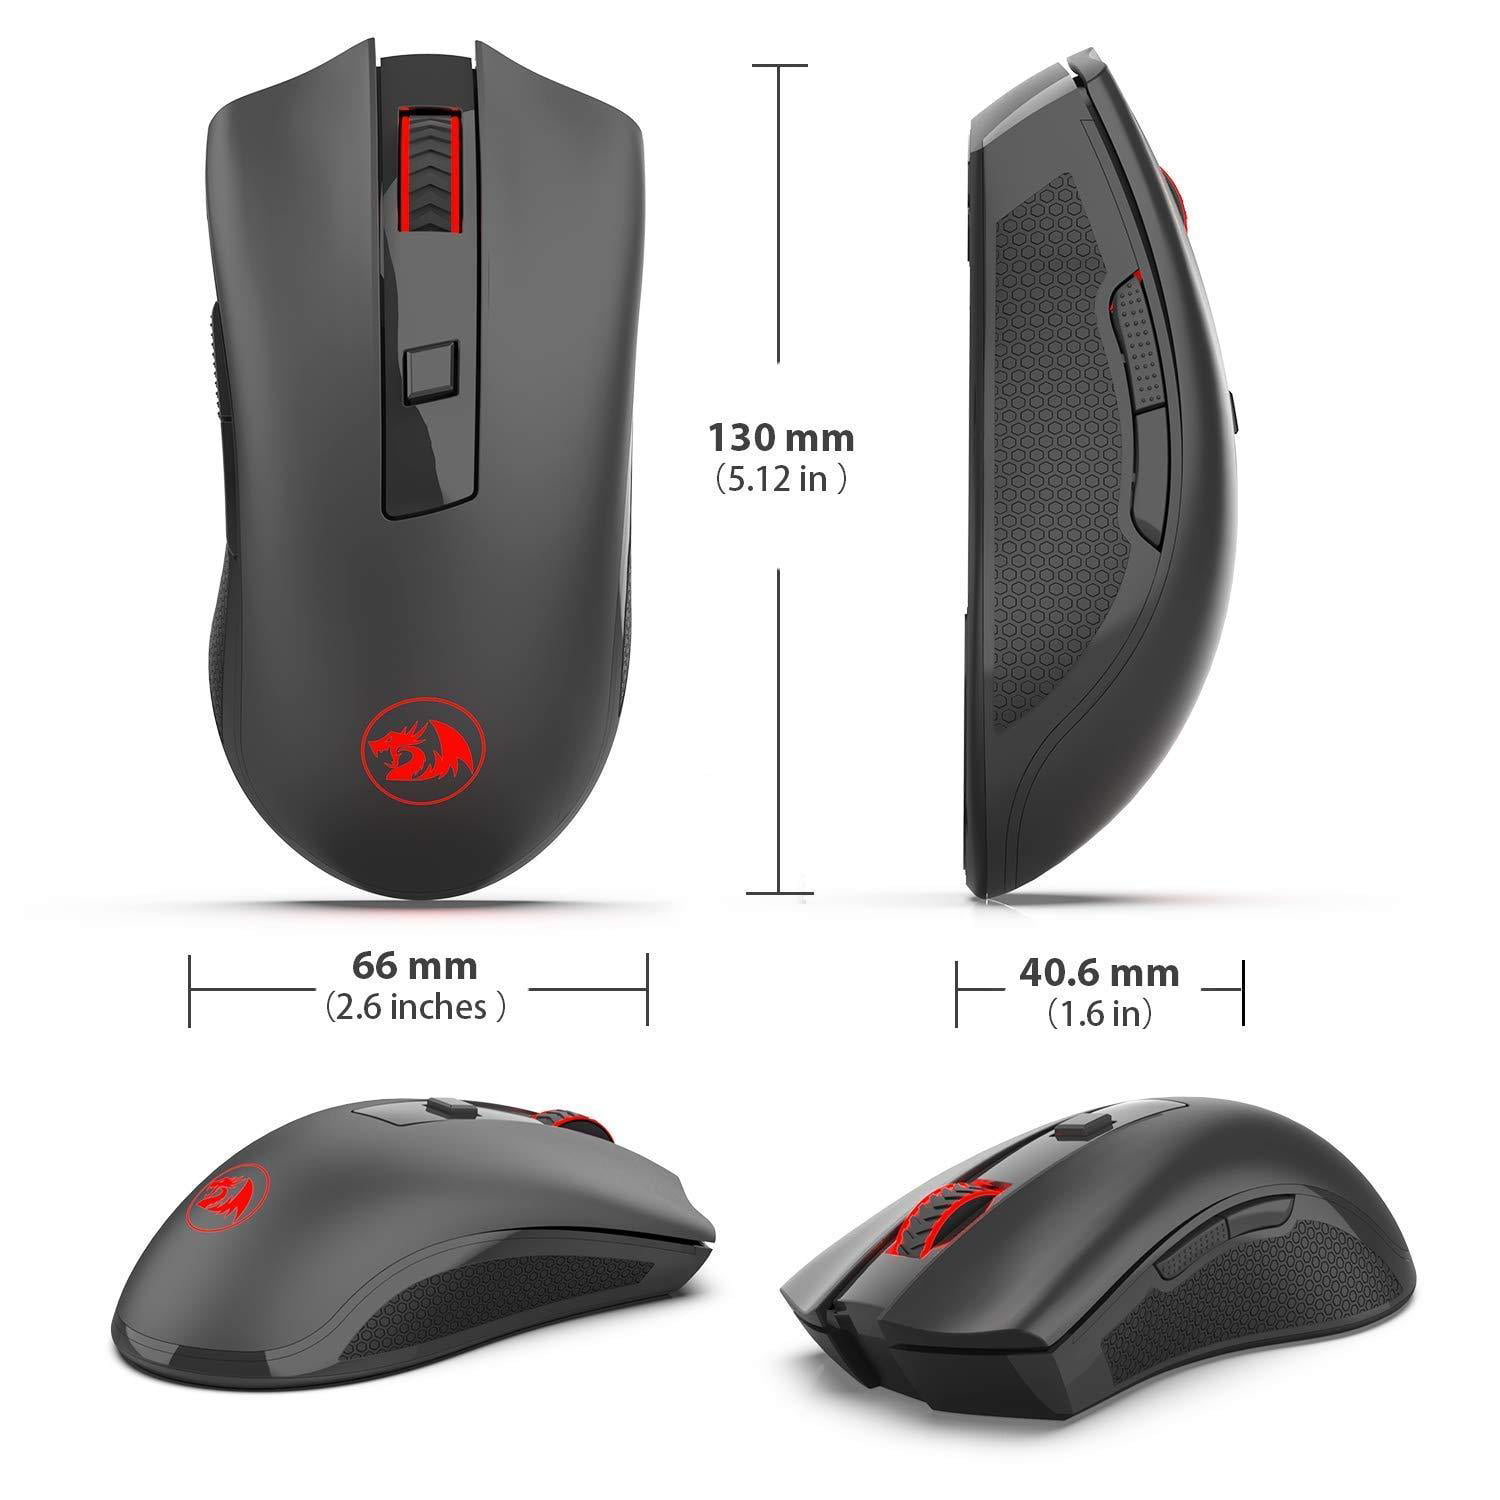 Redragon M653 MIG Optical 2.4G Wireless Mouse with USB Receiver PC Macbook 6 Buttons for Desktop Laptop Notebook Computer Protable Gaming & Office Mice 5 Adjustable DPI Levels